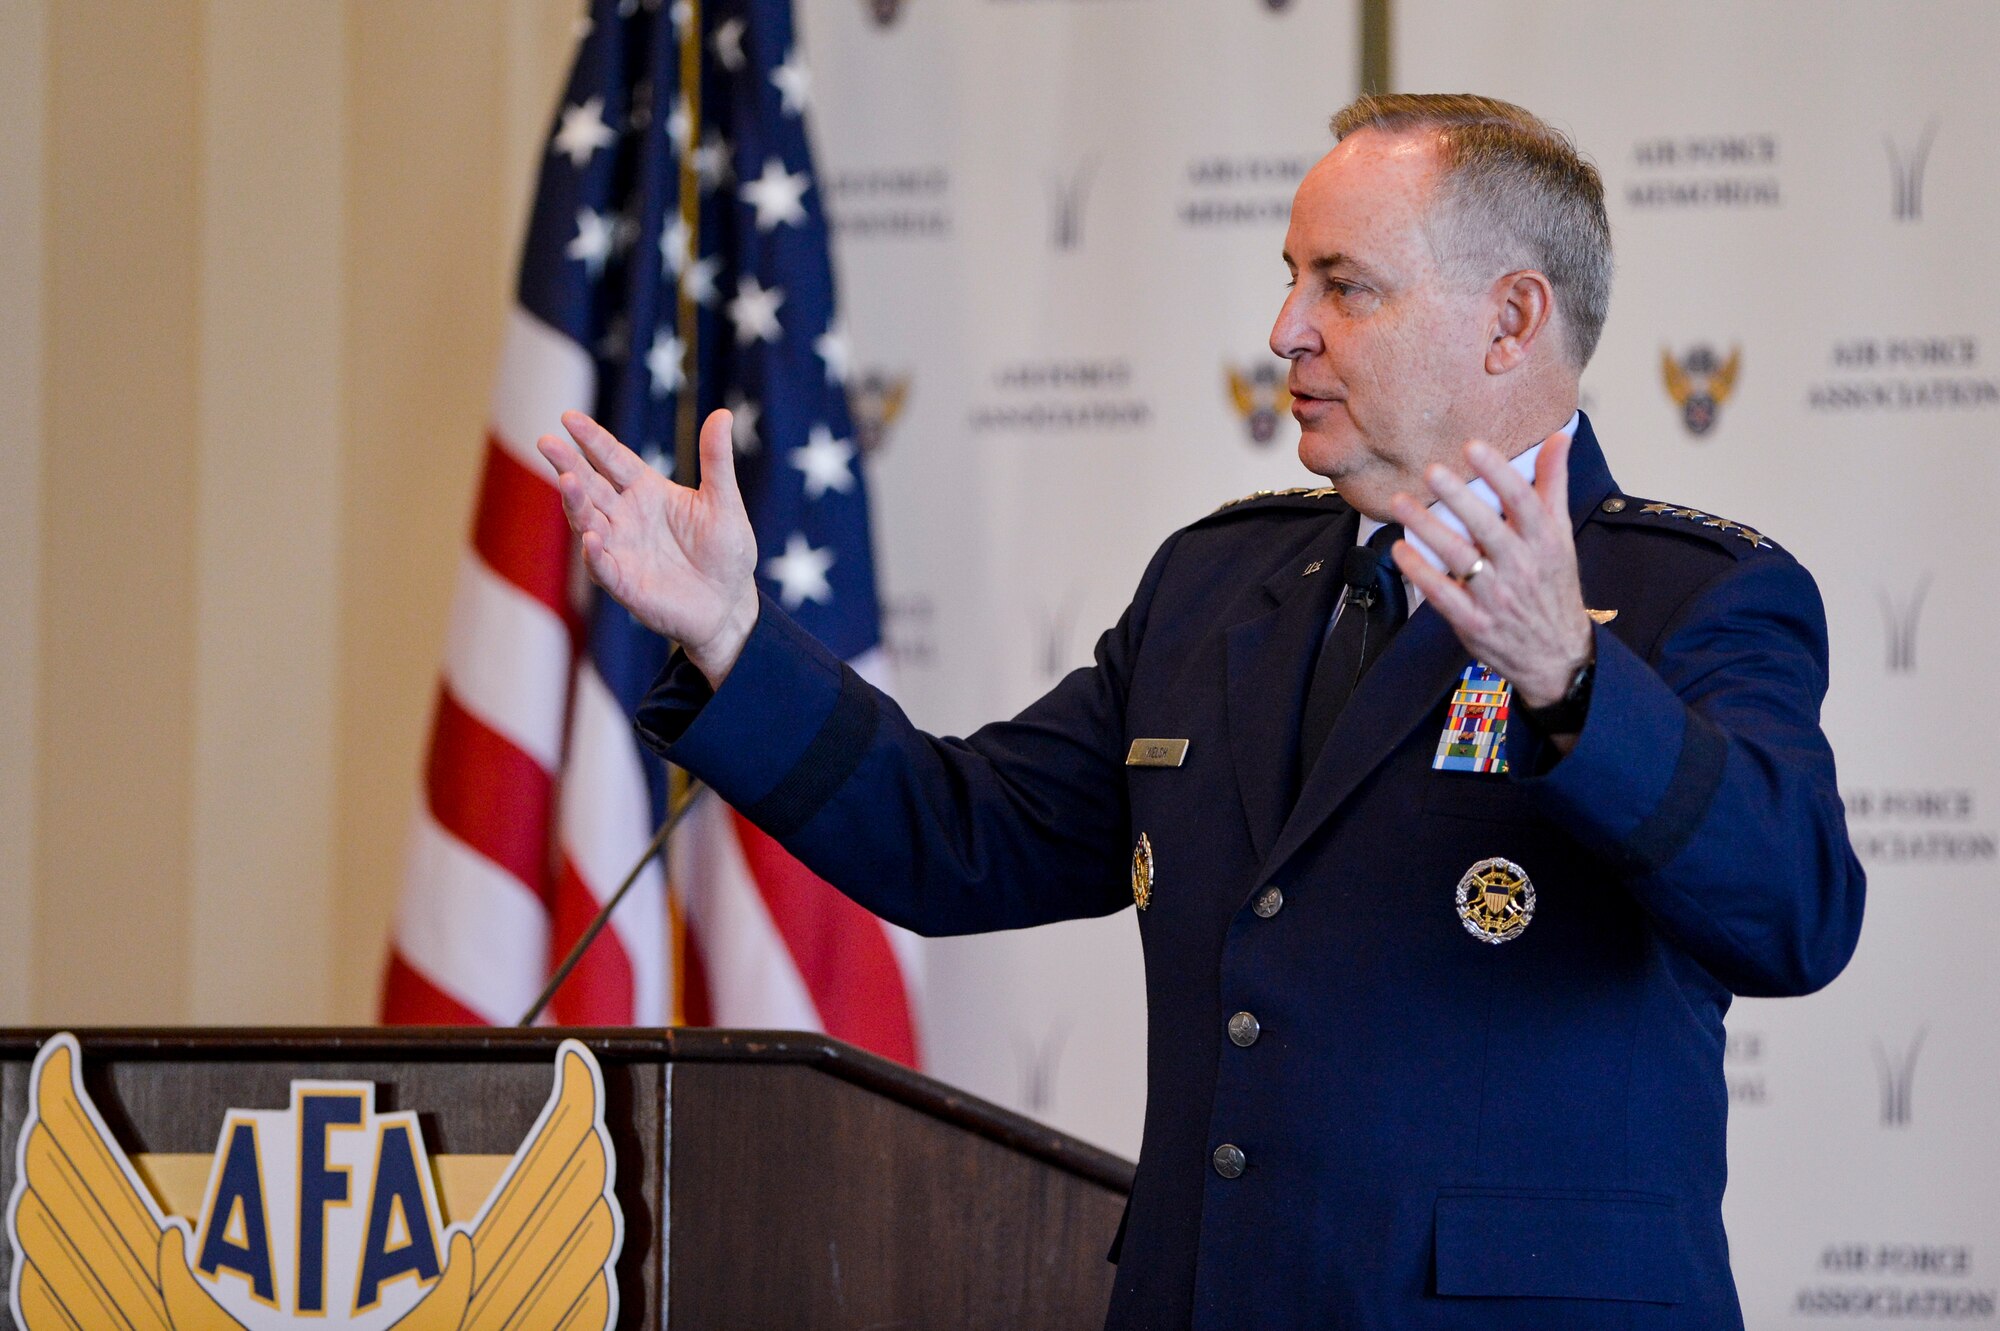 Air Force Chief of Staff Gen. Mark A. Welsh III addresses the audience during his speech at the Air Force Association’s monthly Breakfast Series in Arlington, Va., May 26, 2016. The Air Force Association's Breakfast Series brings together industry partners, the international attaché corps, and both military and civilian leadership for informative briefings on a monthly basis for updates on relevant current initiatives. (U.S. Air Force photo/Tech. Sgt. Joshua L. DeMotts)